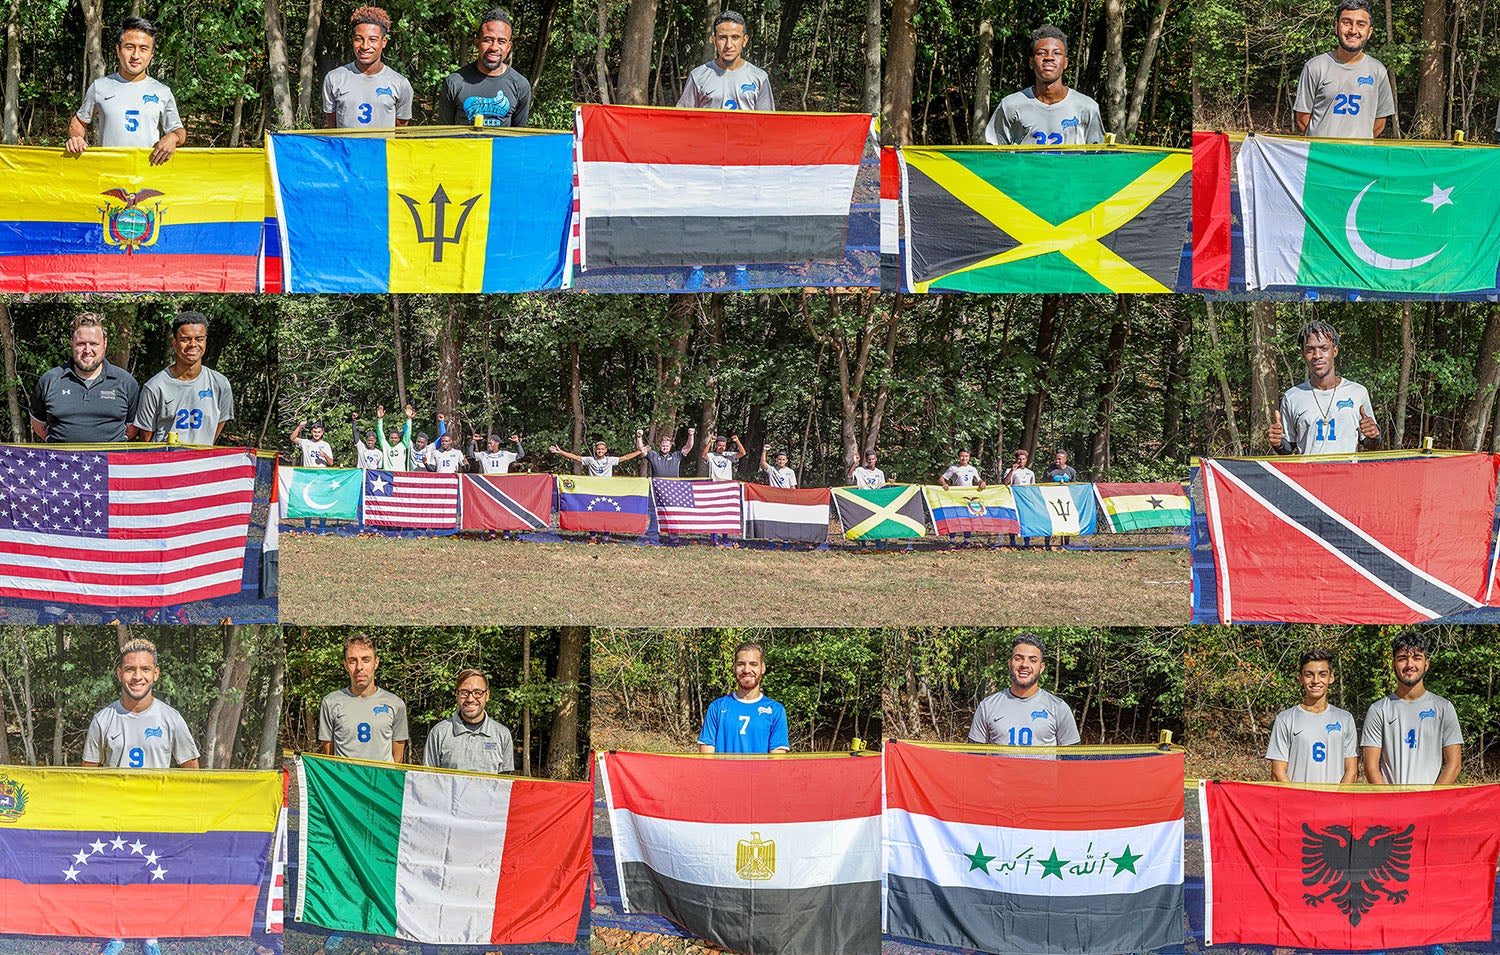 Photo collage of players with the flags of their native countries